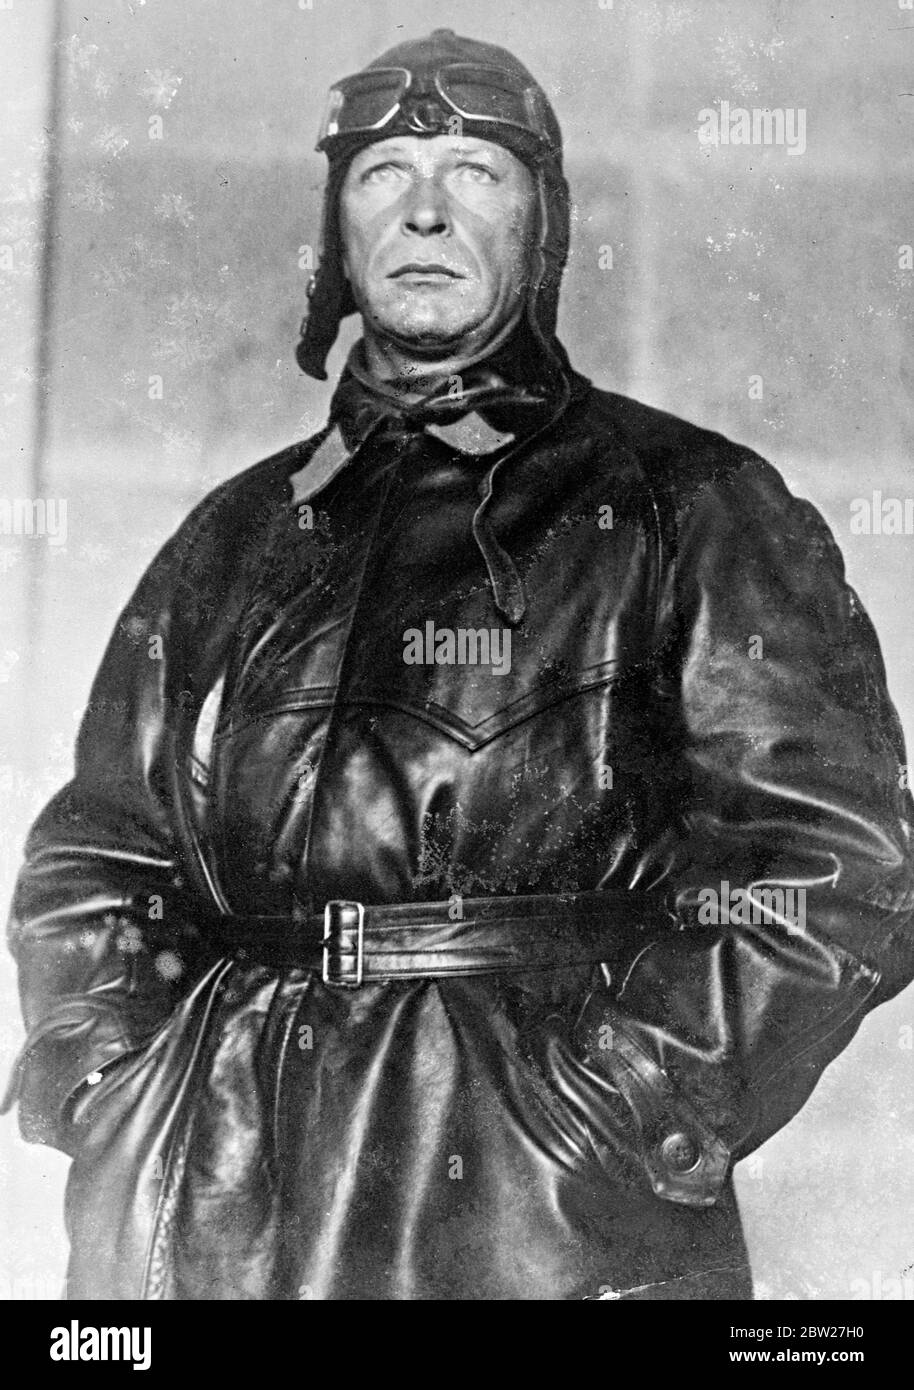 Me Mikhail Mikhailovich Gromov, chief pilot on the Moscow - San Francisco flight. Mr Gromov, Soviet Polar flyer, and his two companions major Andrei Borisevich Yumashev, and Danilin, were expected to arrive at San Francisco this morning (Wednesday) after their record-breaking flight. 14 July 1937 Stock Photo